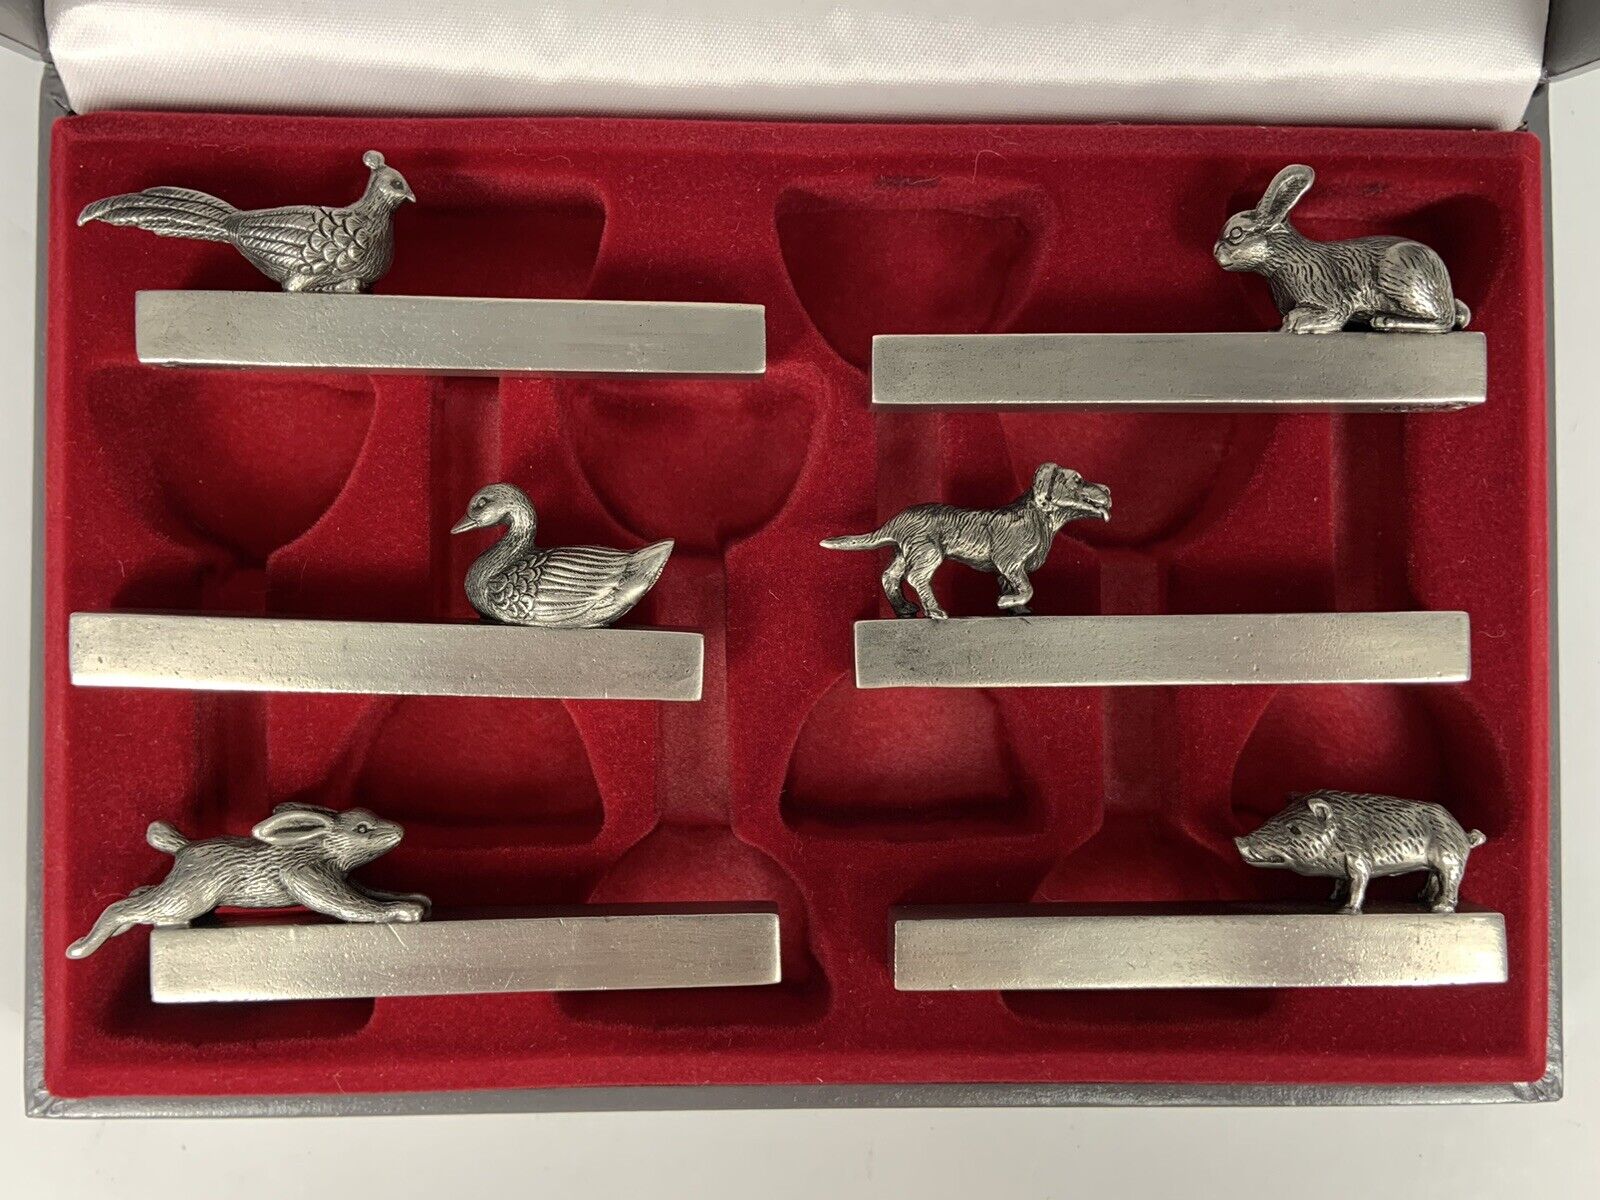 ETAIN ROYAL French Pewter Knife Rests  Set of 6 Animals: Rabbit, Hare, Dog, Duck